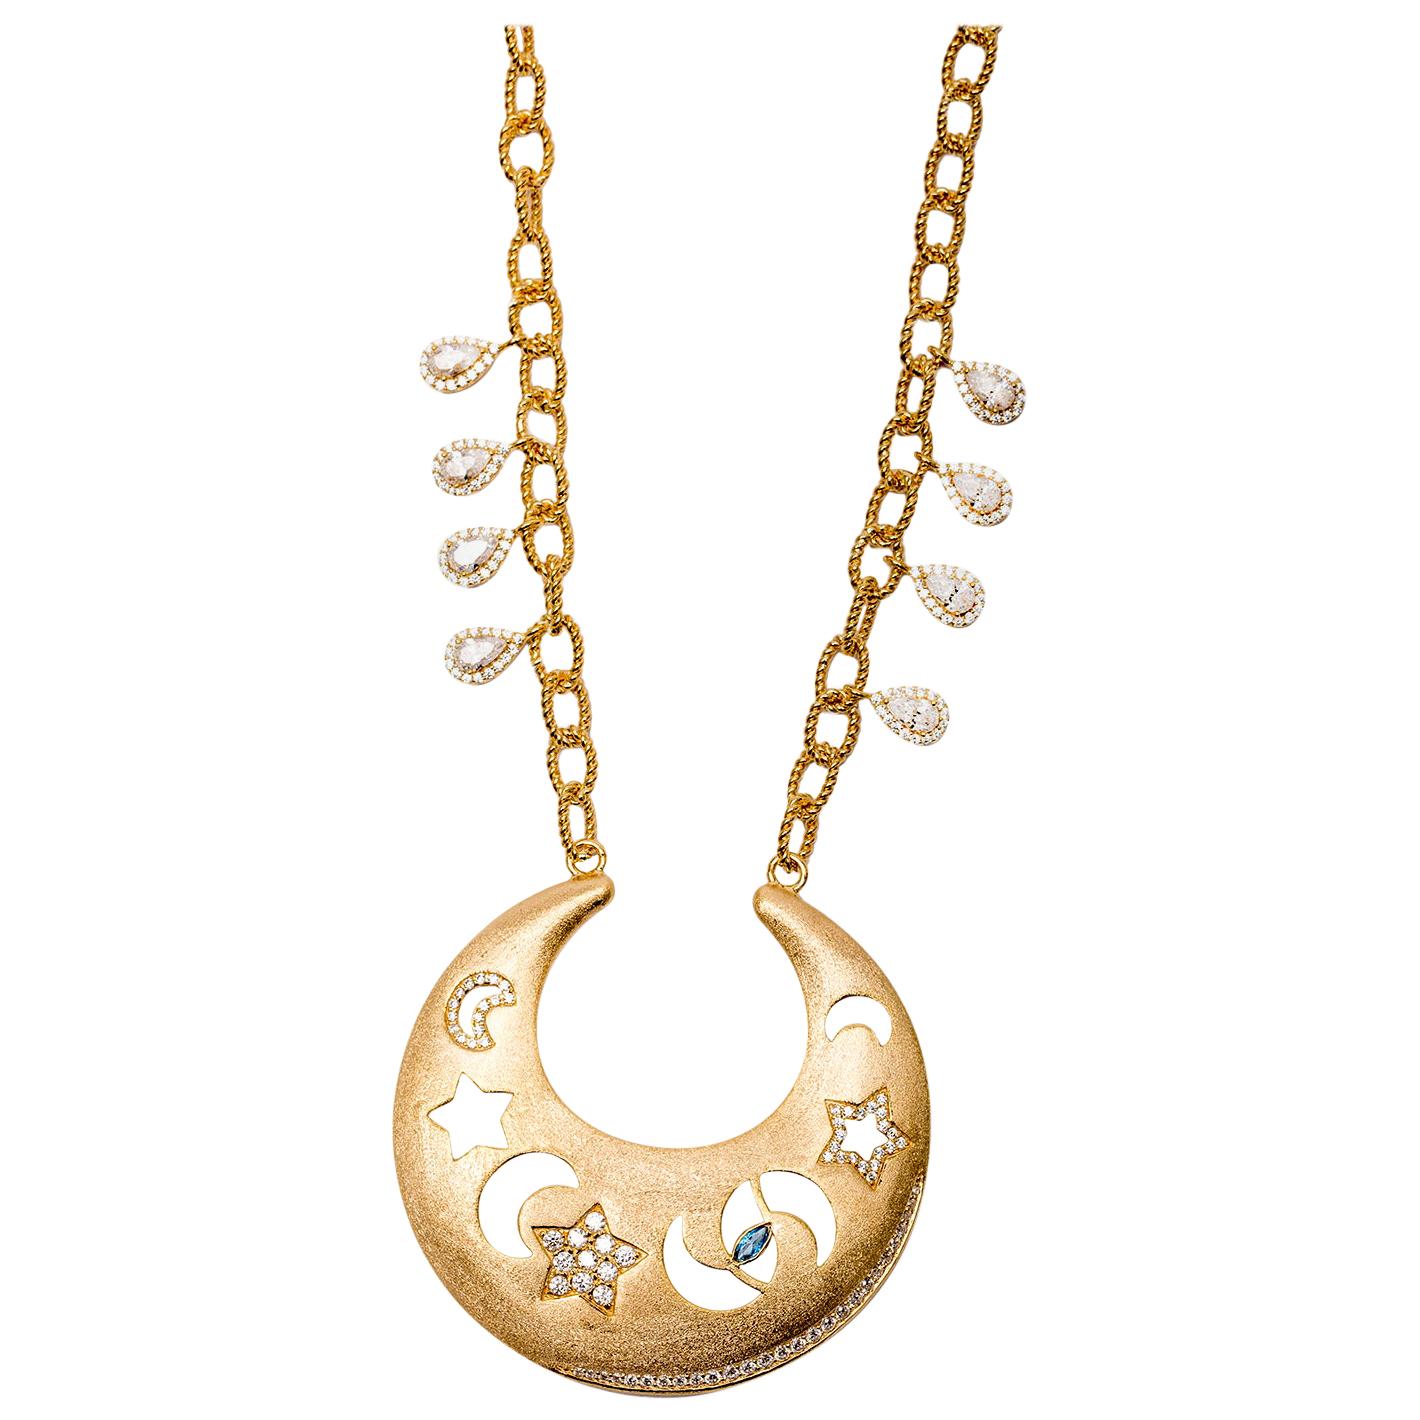 Ammanii Celestial Necklace with Moons, Stars and Protective Eye in Vermeil Gold